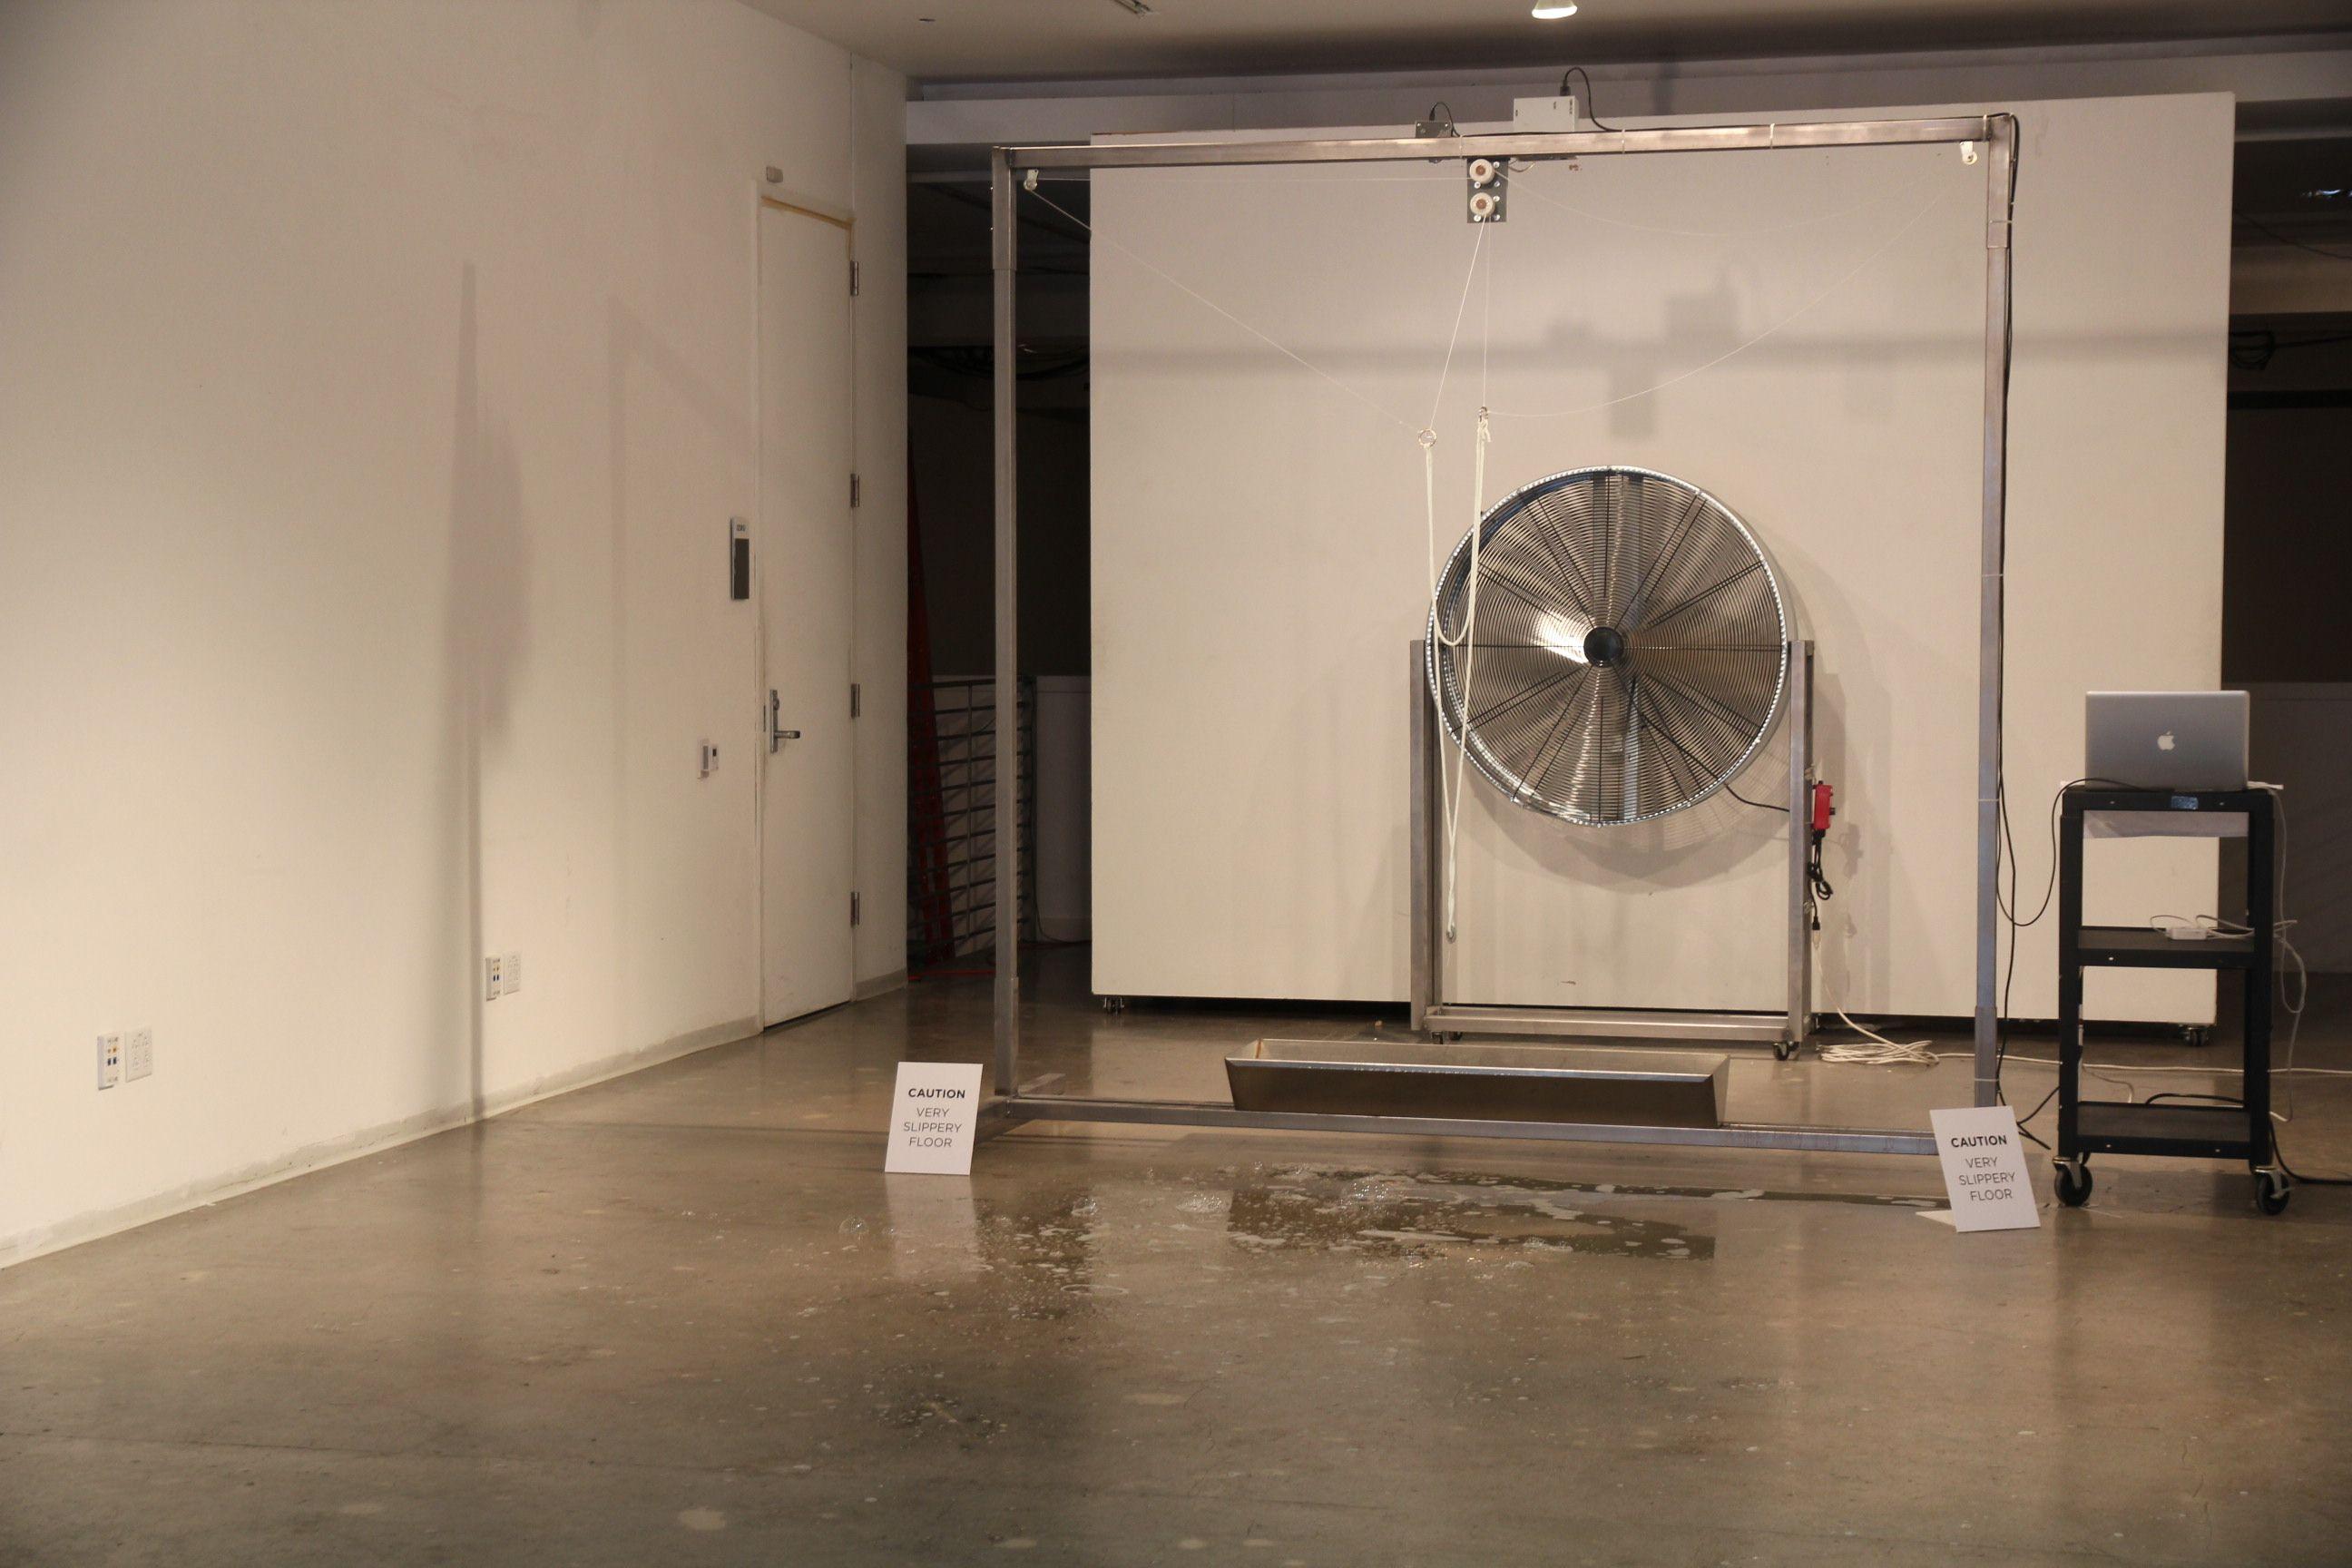 An art installation with a fan and computer.